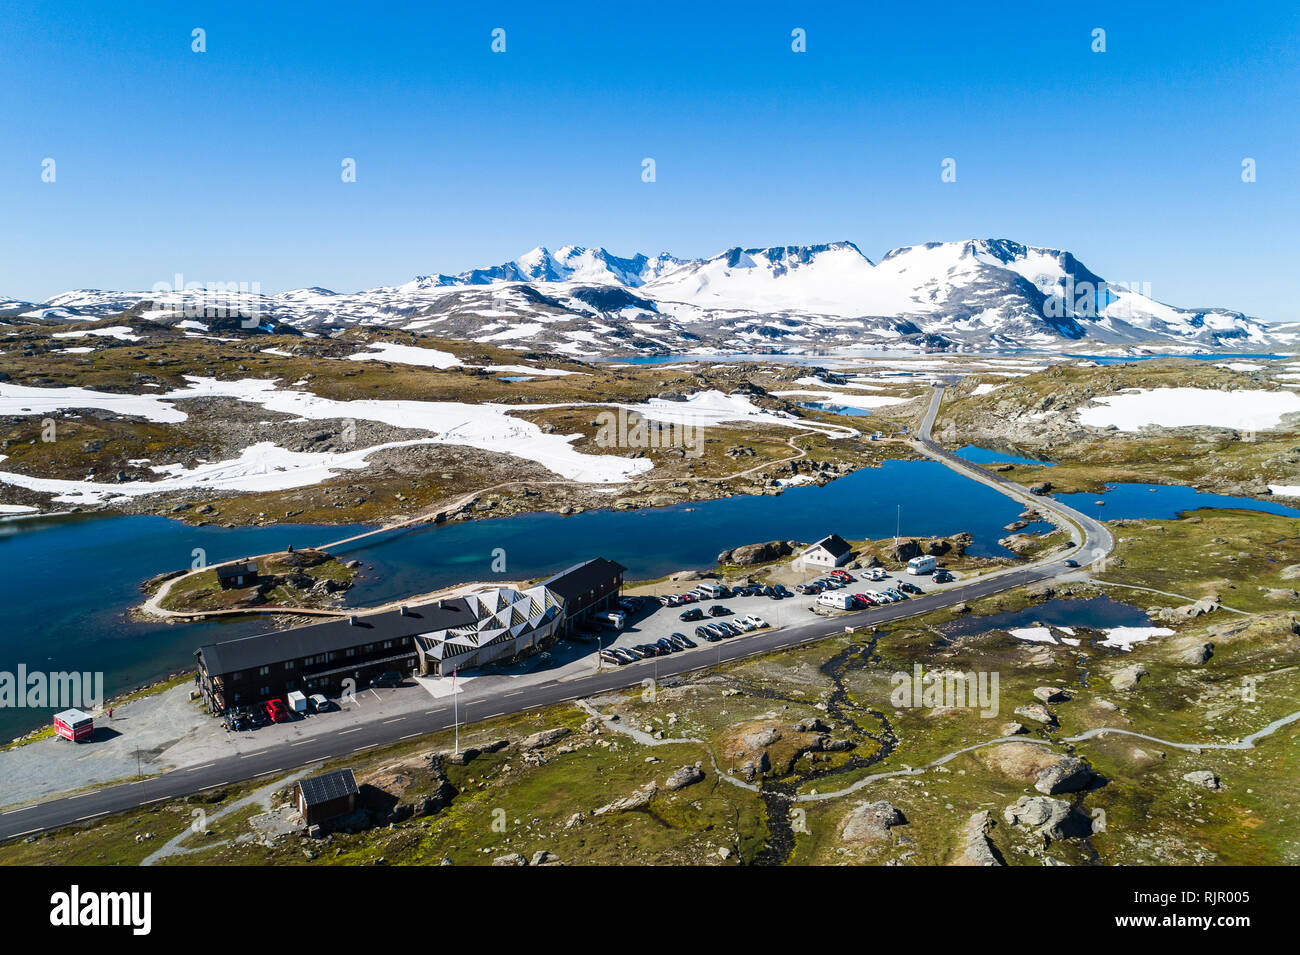 Lakeside skiing centre surrounded by rugged landscape and mountains, drone view, Sognefjell, Jotunheimen, Norway, Europe Stock Photo